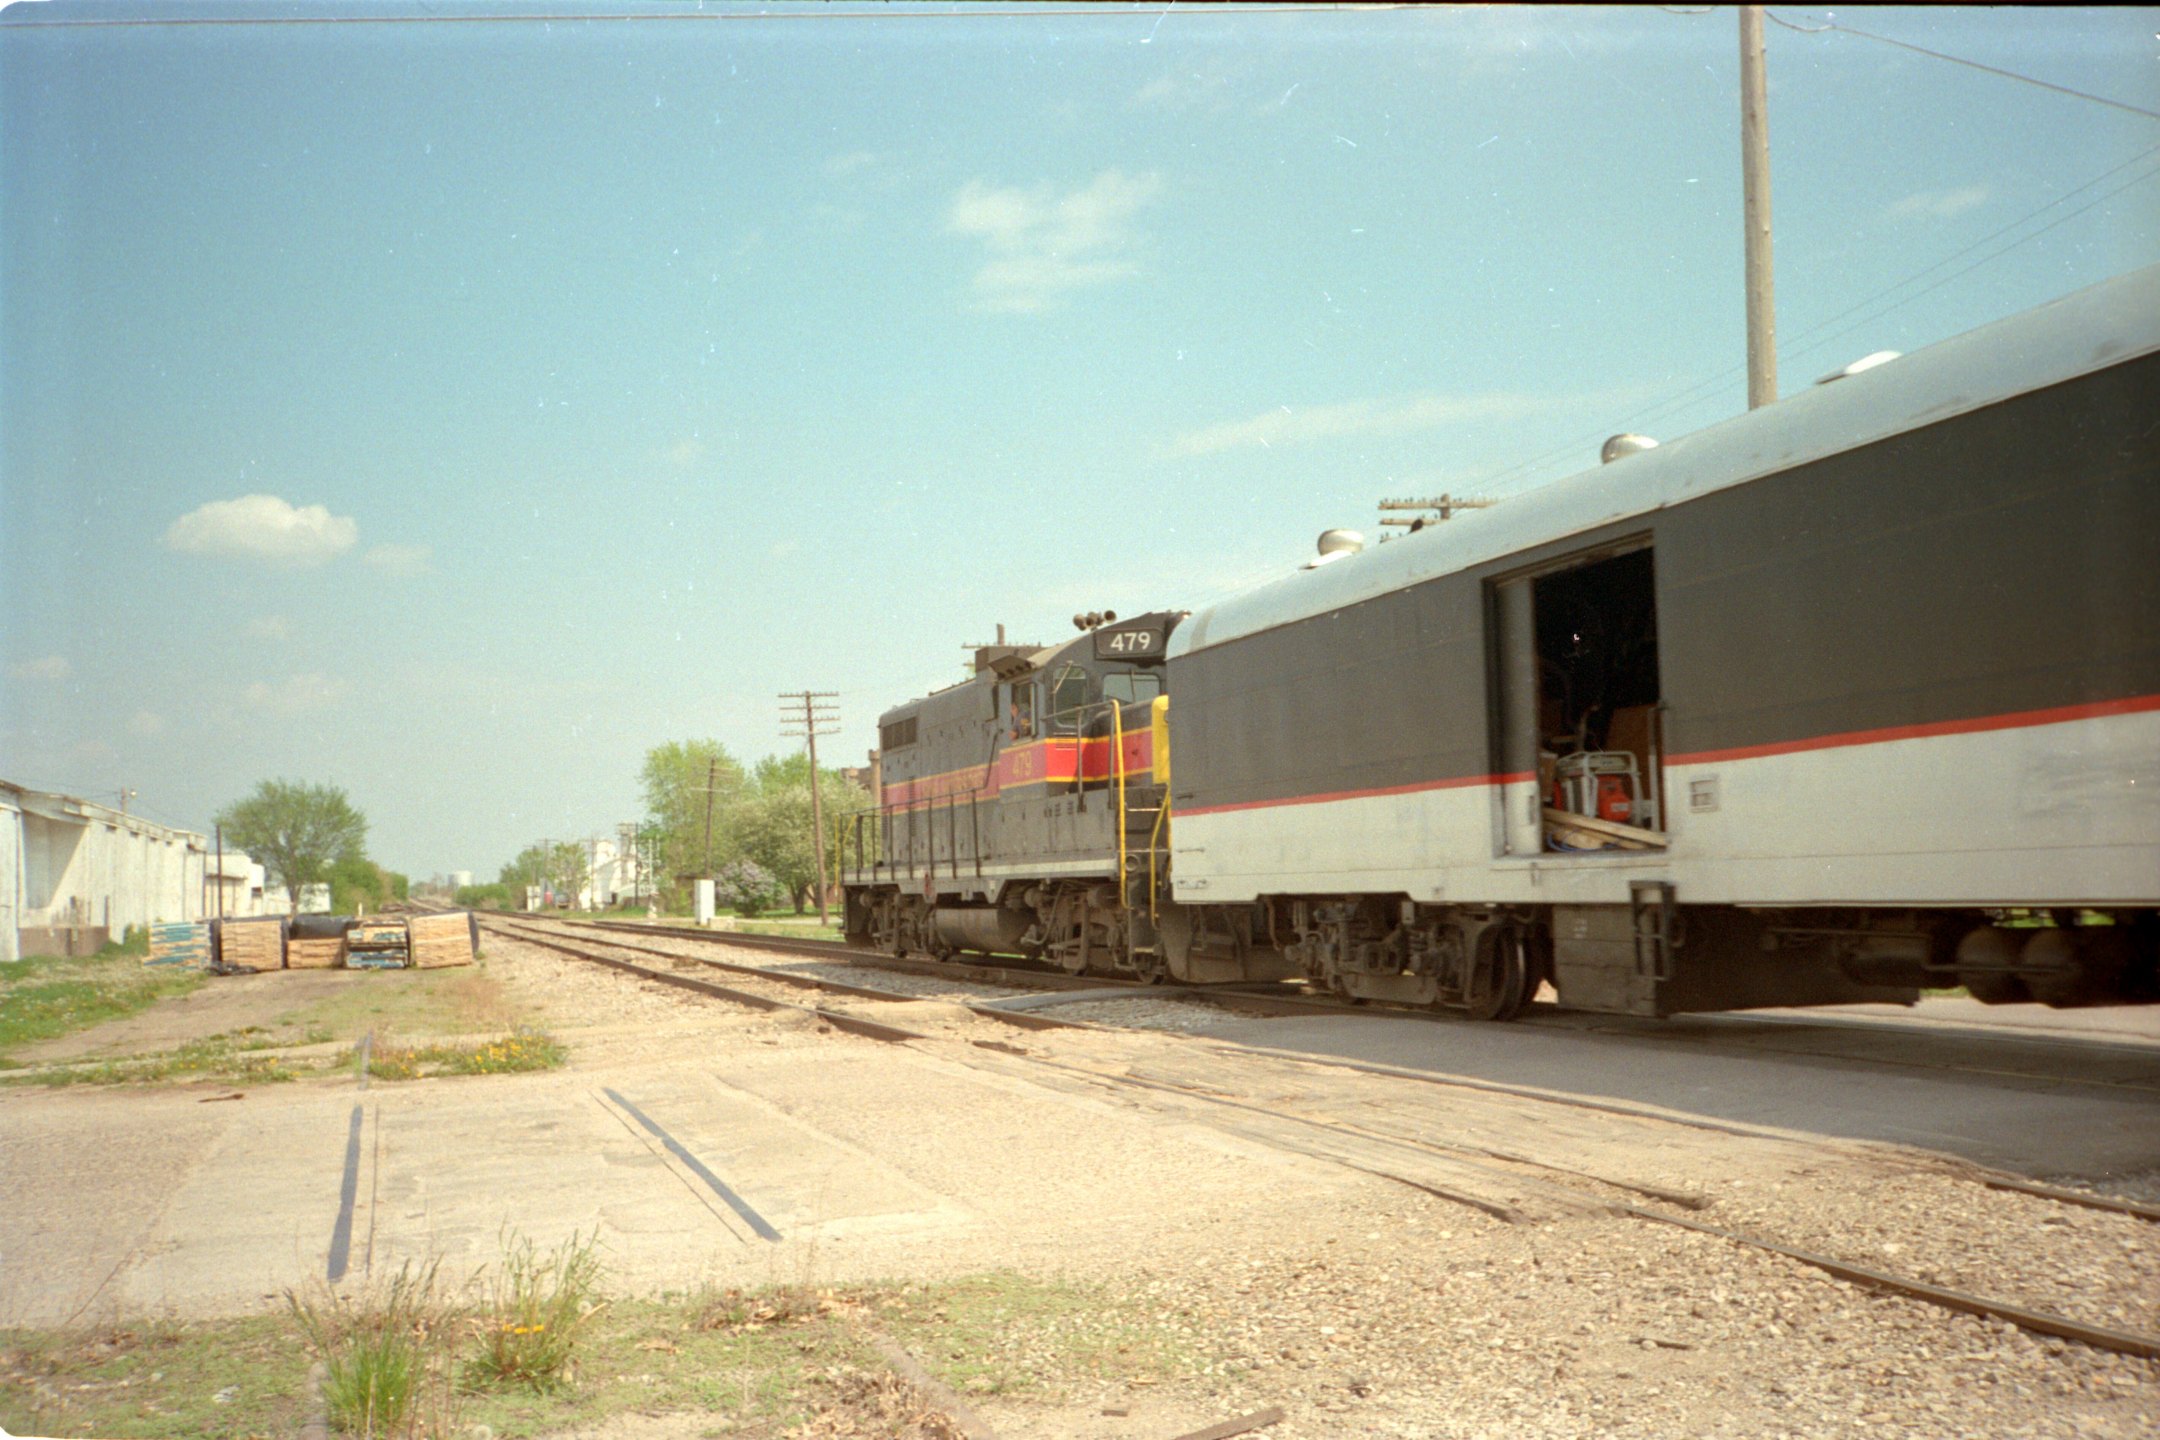 479 eastbound, clearly showing the ex-Milw baggage car open during the heat of summer